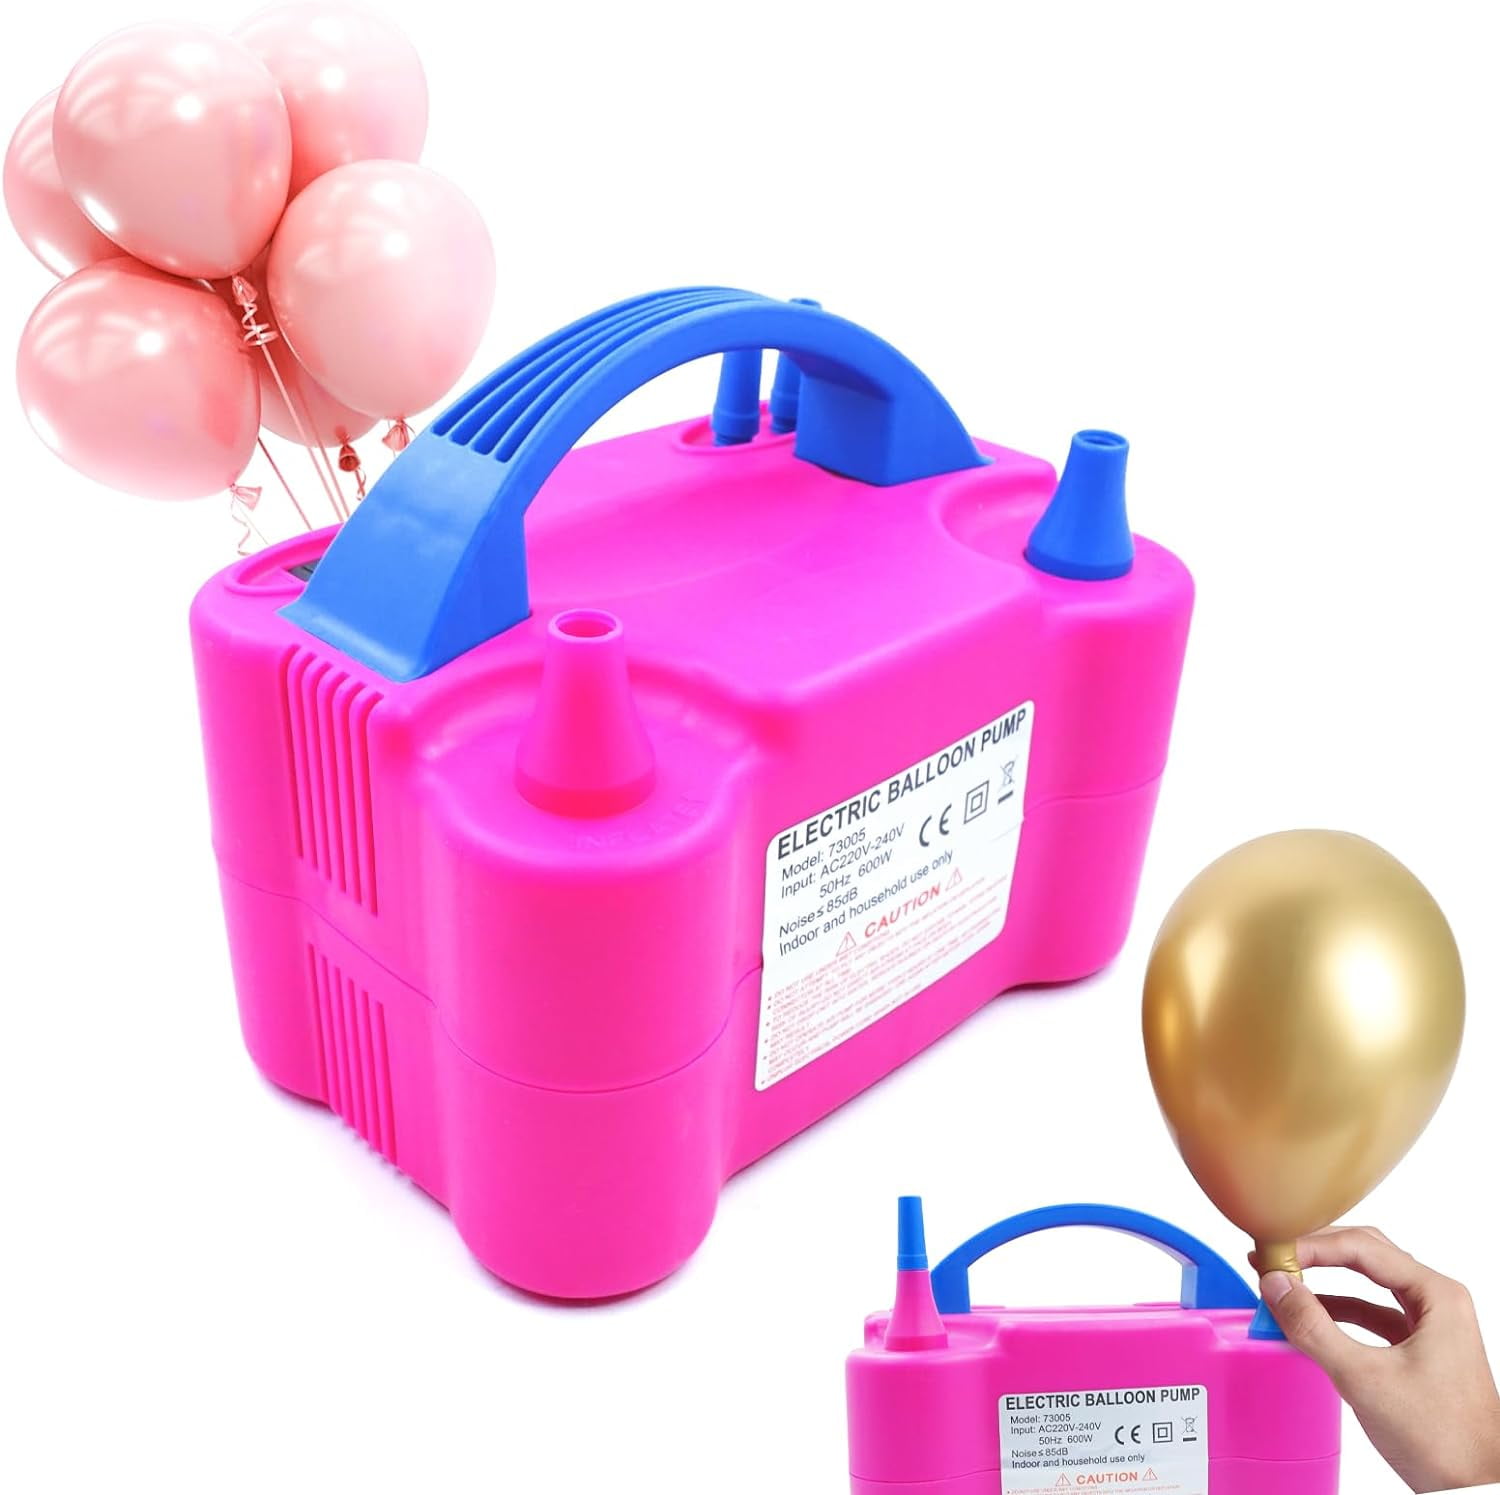 balloons party decorations electric balloon pump